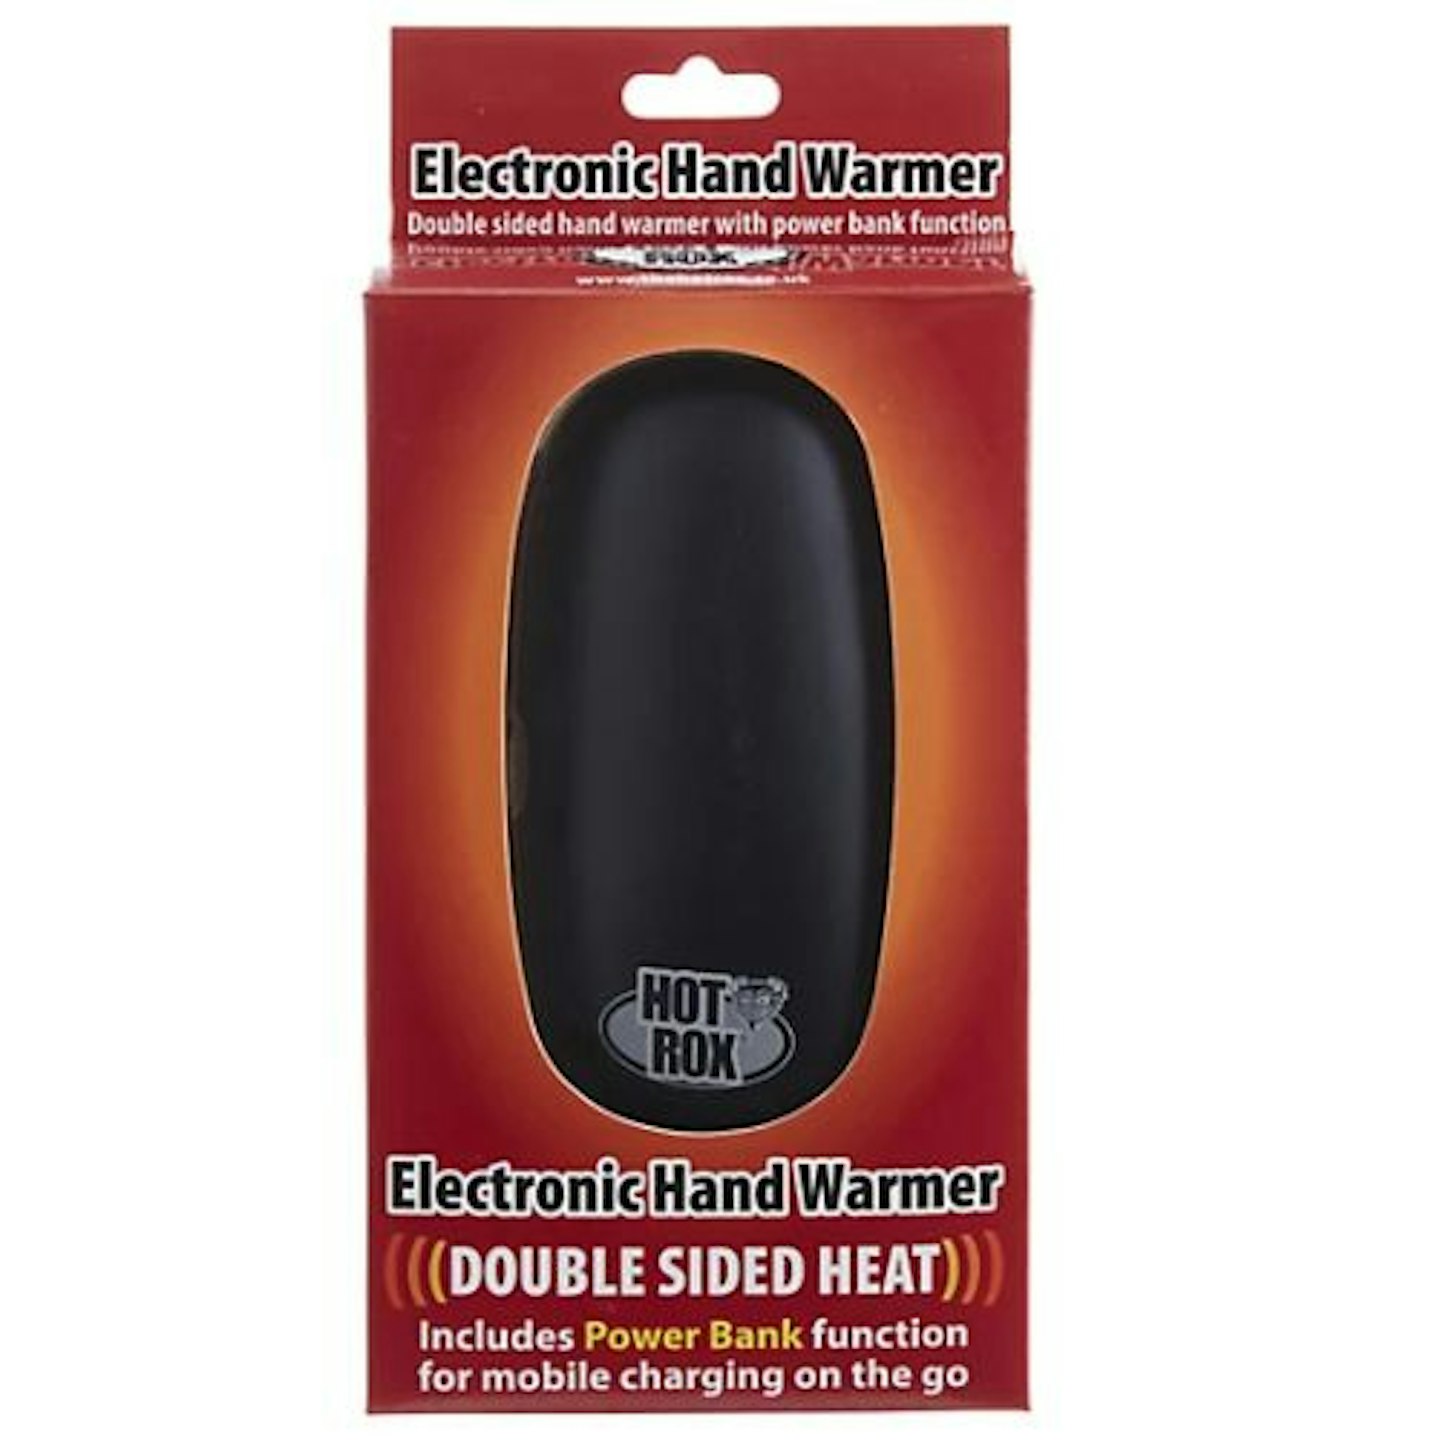 HotRox Double Sided Electronic Hand Warmer